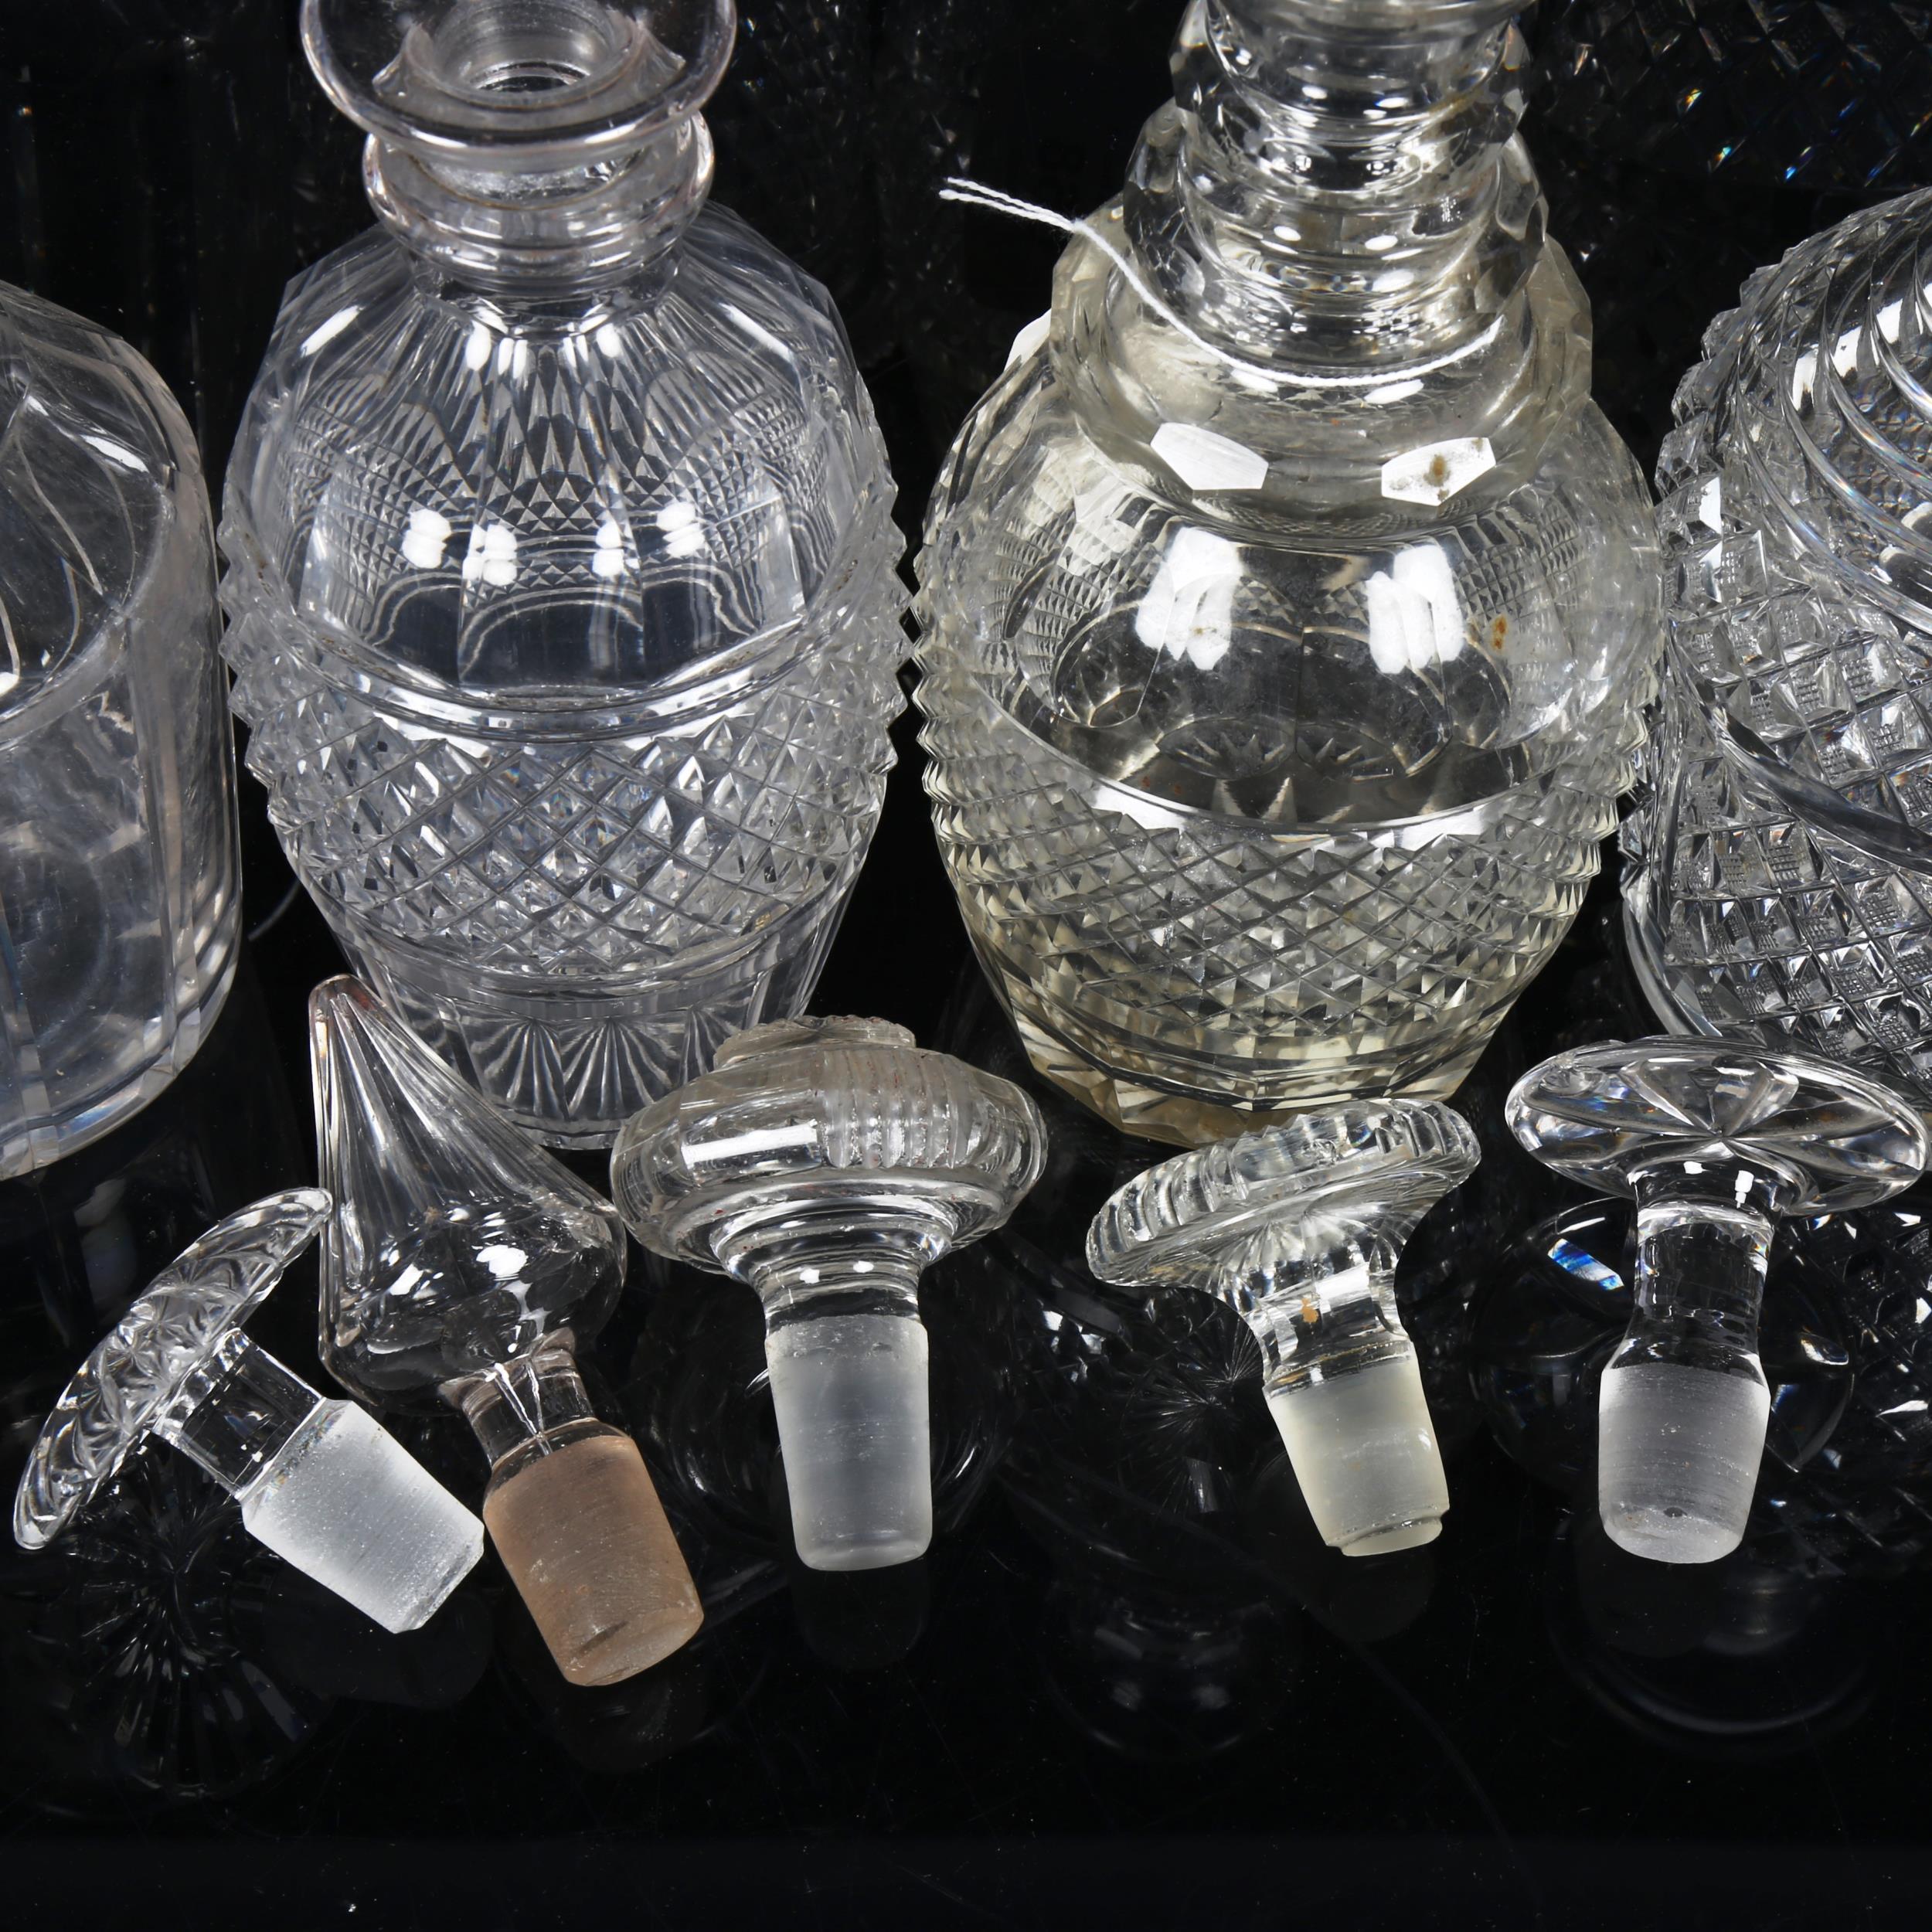 5 Antique cut-glass decanters and stoppers, tallest 28cm - Image 2 of 2